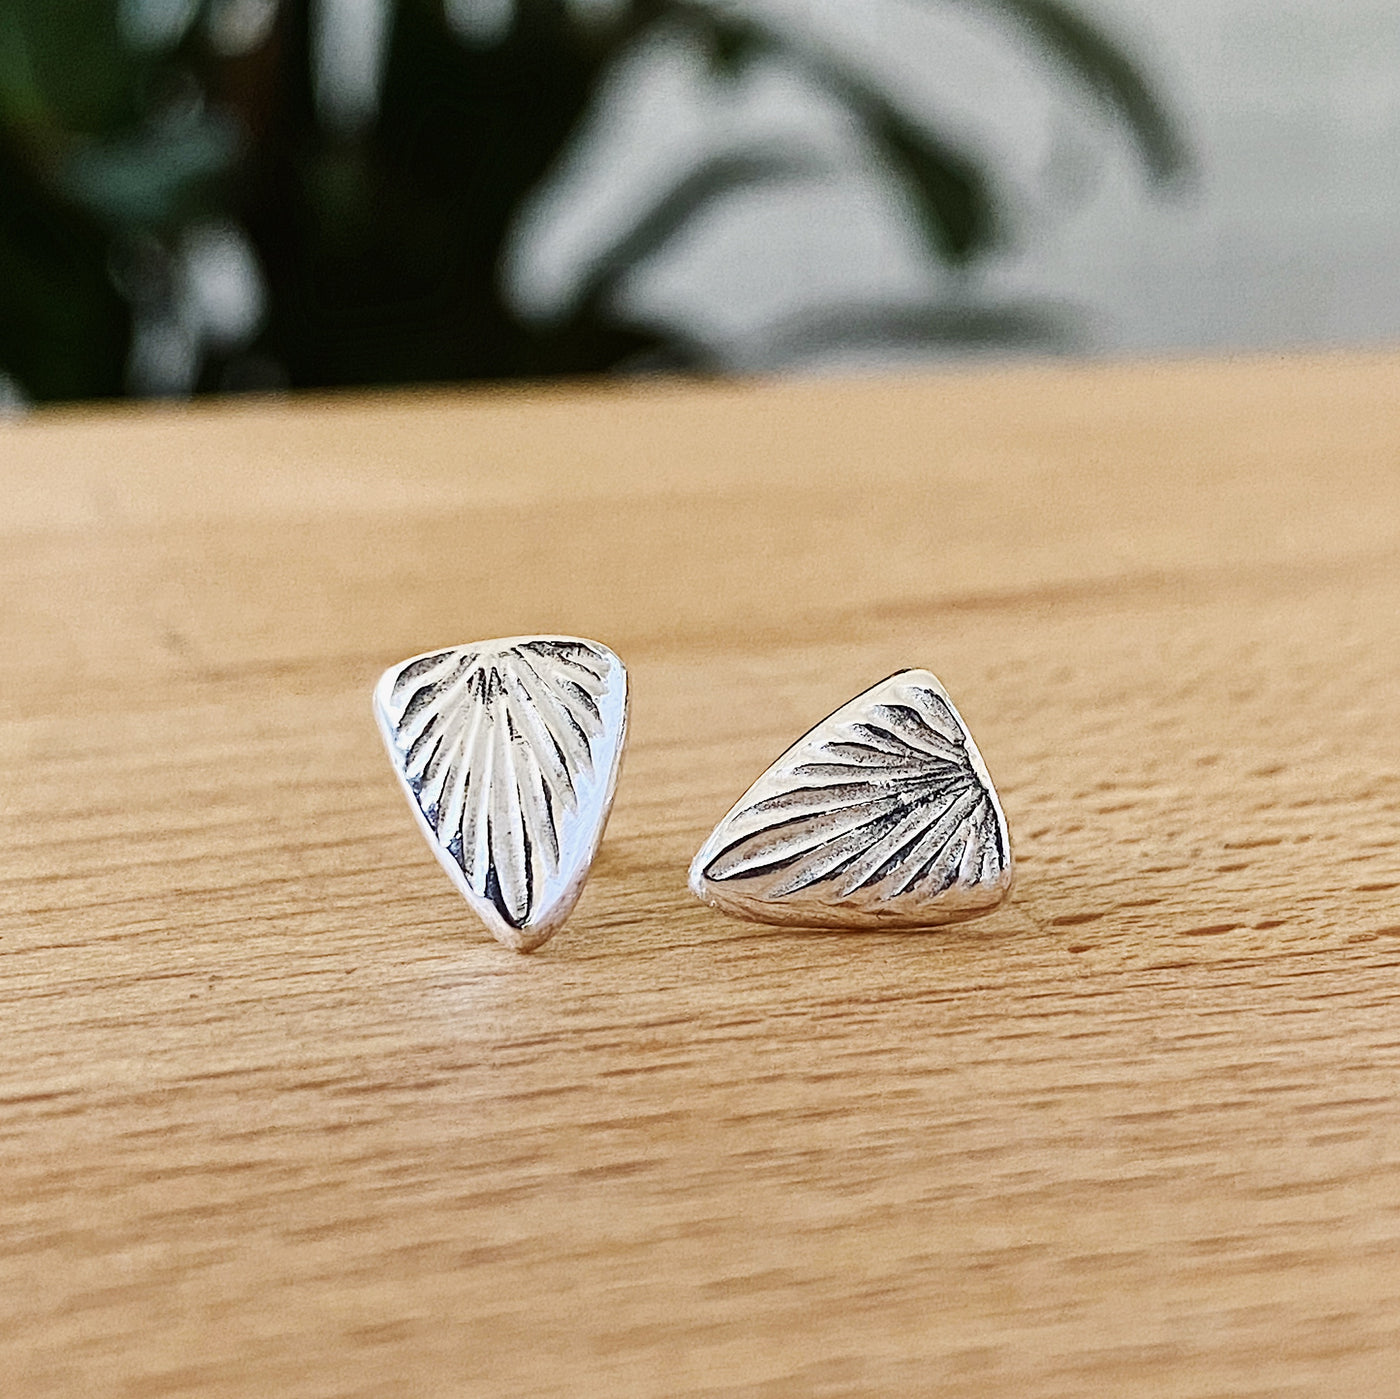 Sterling silver triangular stud earrings with a carved sunburst texture by Corey Egan on a tabletop view #2